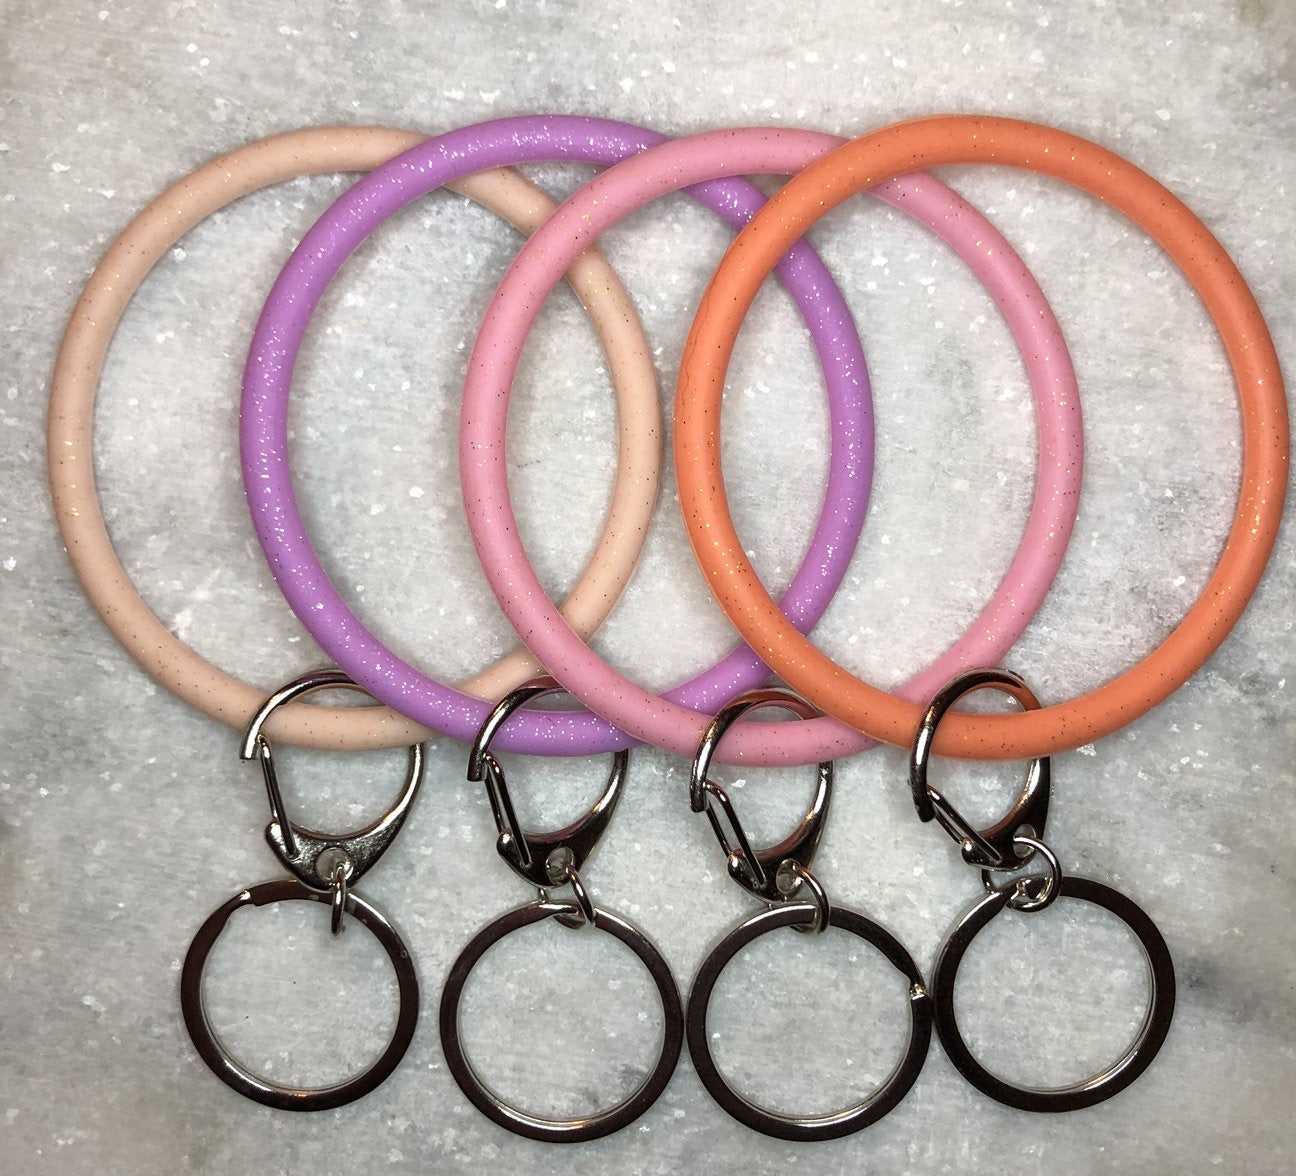 Bracelet Key Ring: Silicone and Glitter